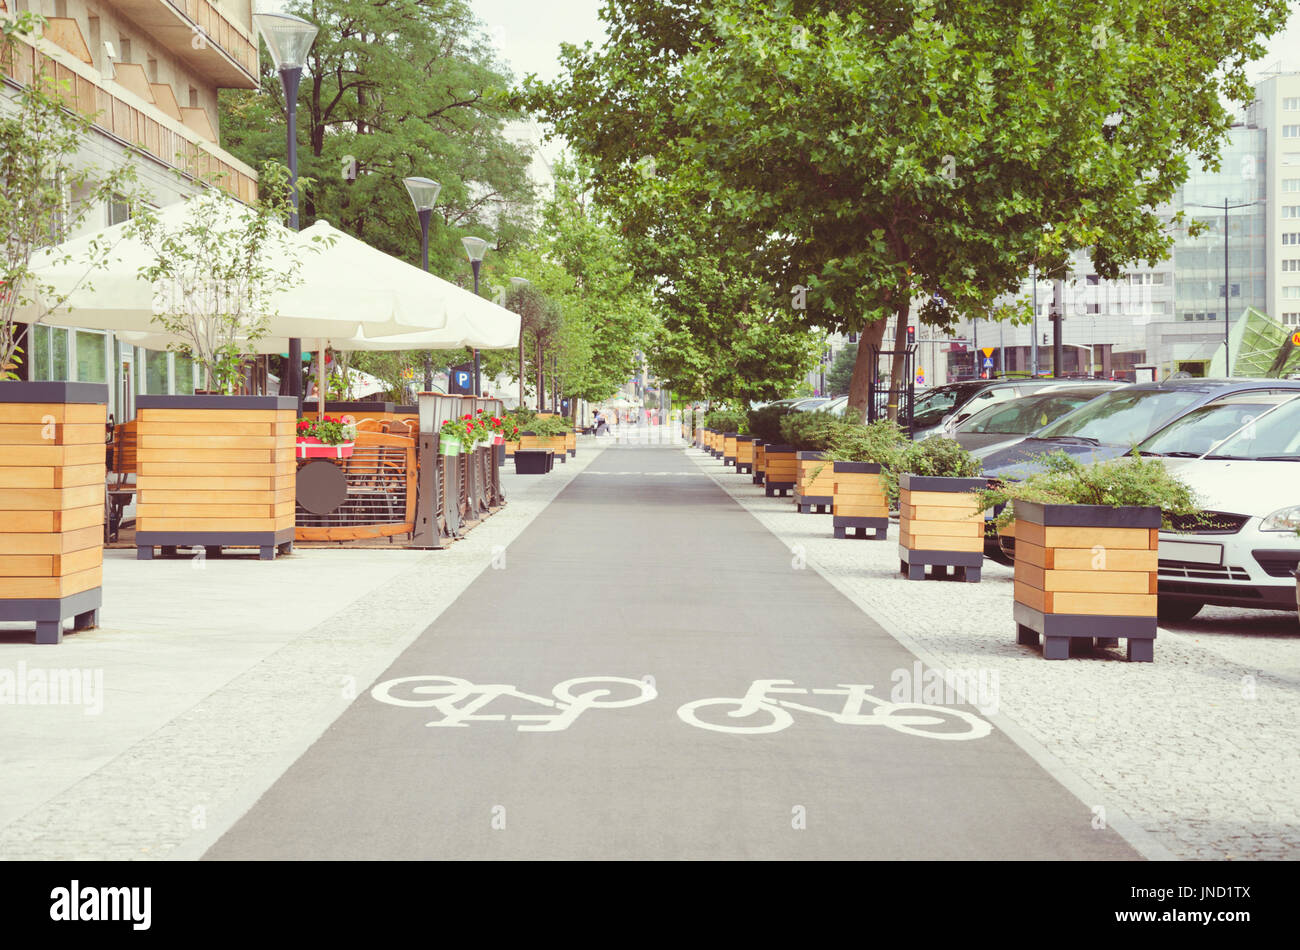 City street with long bicycle lane near outdoor cafe; Vintage effect Stock Photo